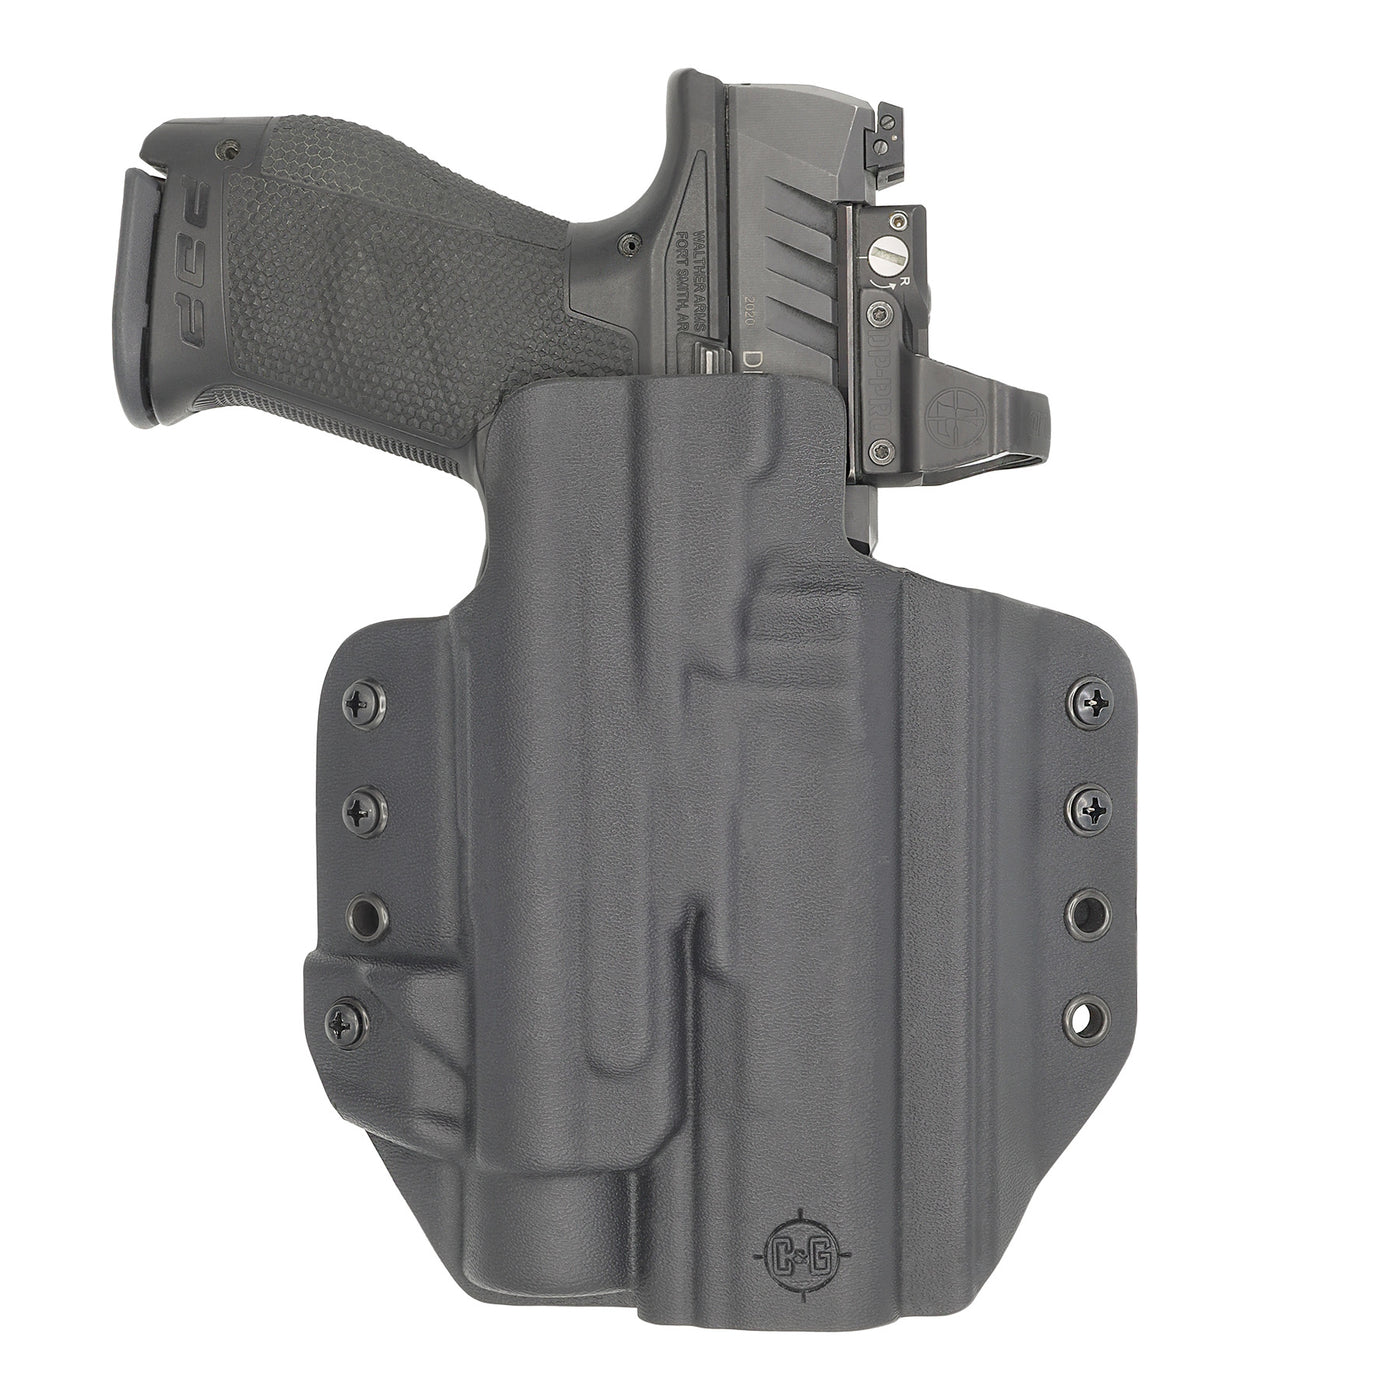 C&G Holsters quickship OWB Tactical M&P 10/45 Streamlight TLR1 in holstered position